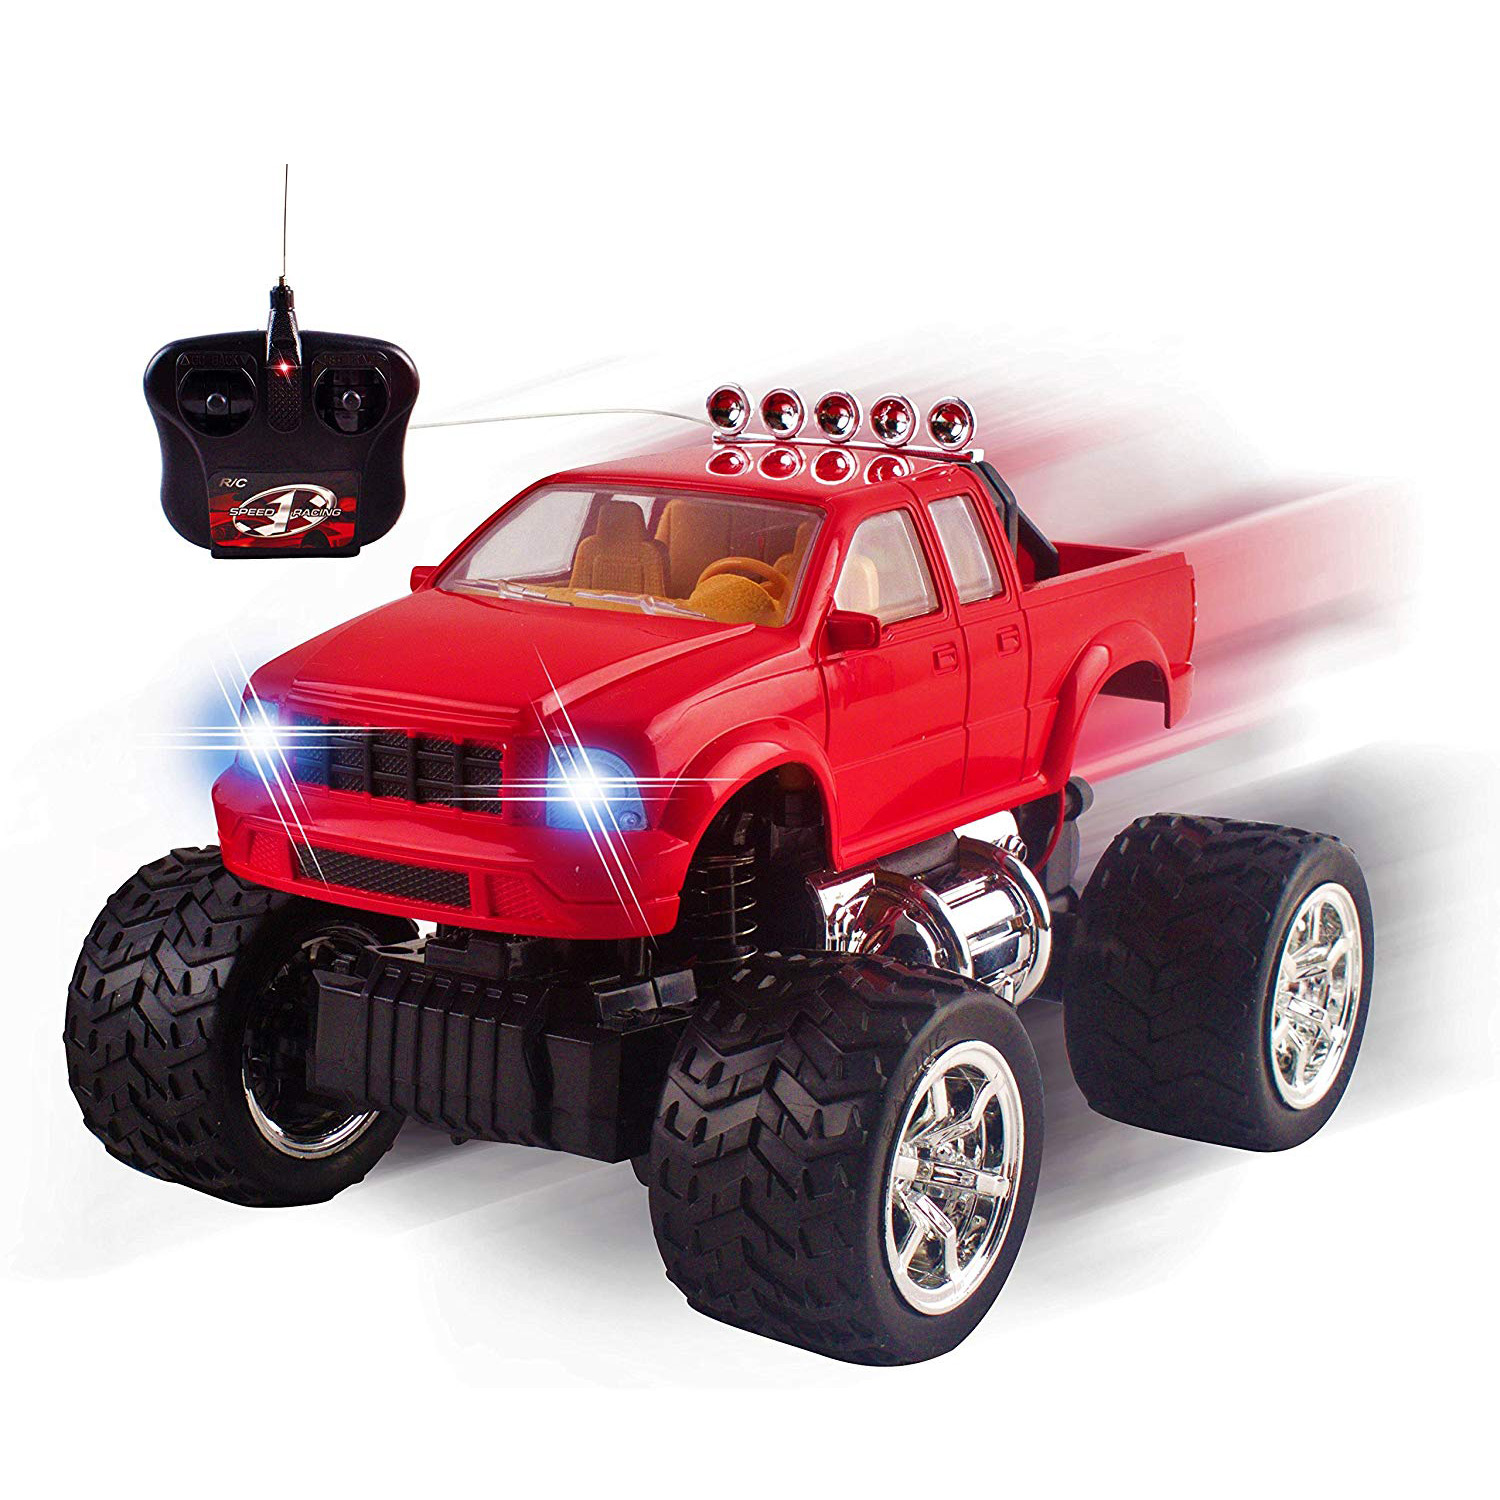 RC Truck Off-Road Series 1:20 Mini Scale Big Wheel Remote Control Car With LED Headlights Ready to Run Fast Nimble Handling Monster Trucks Beast Buggy Toy (Red)